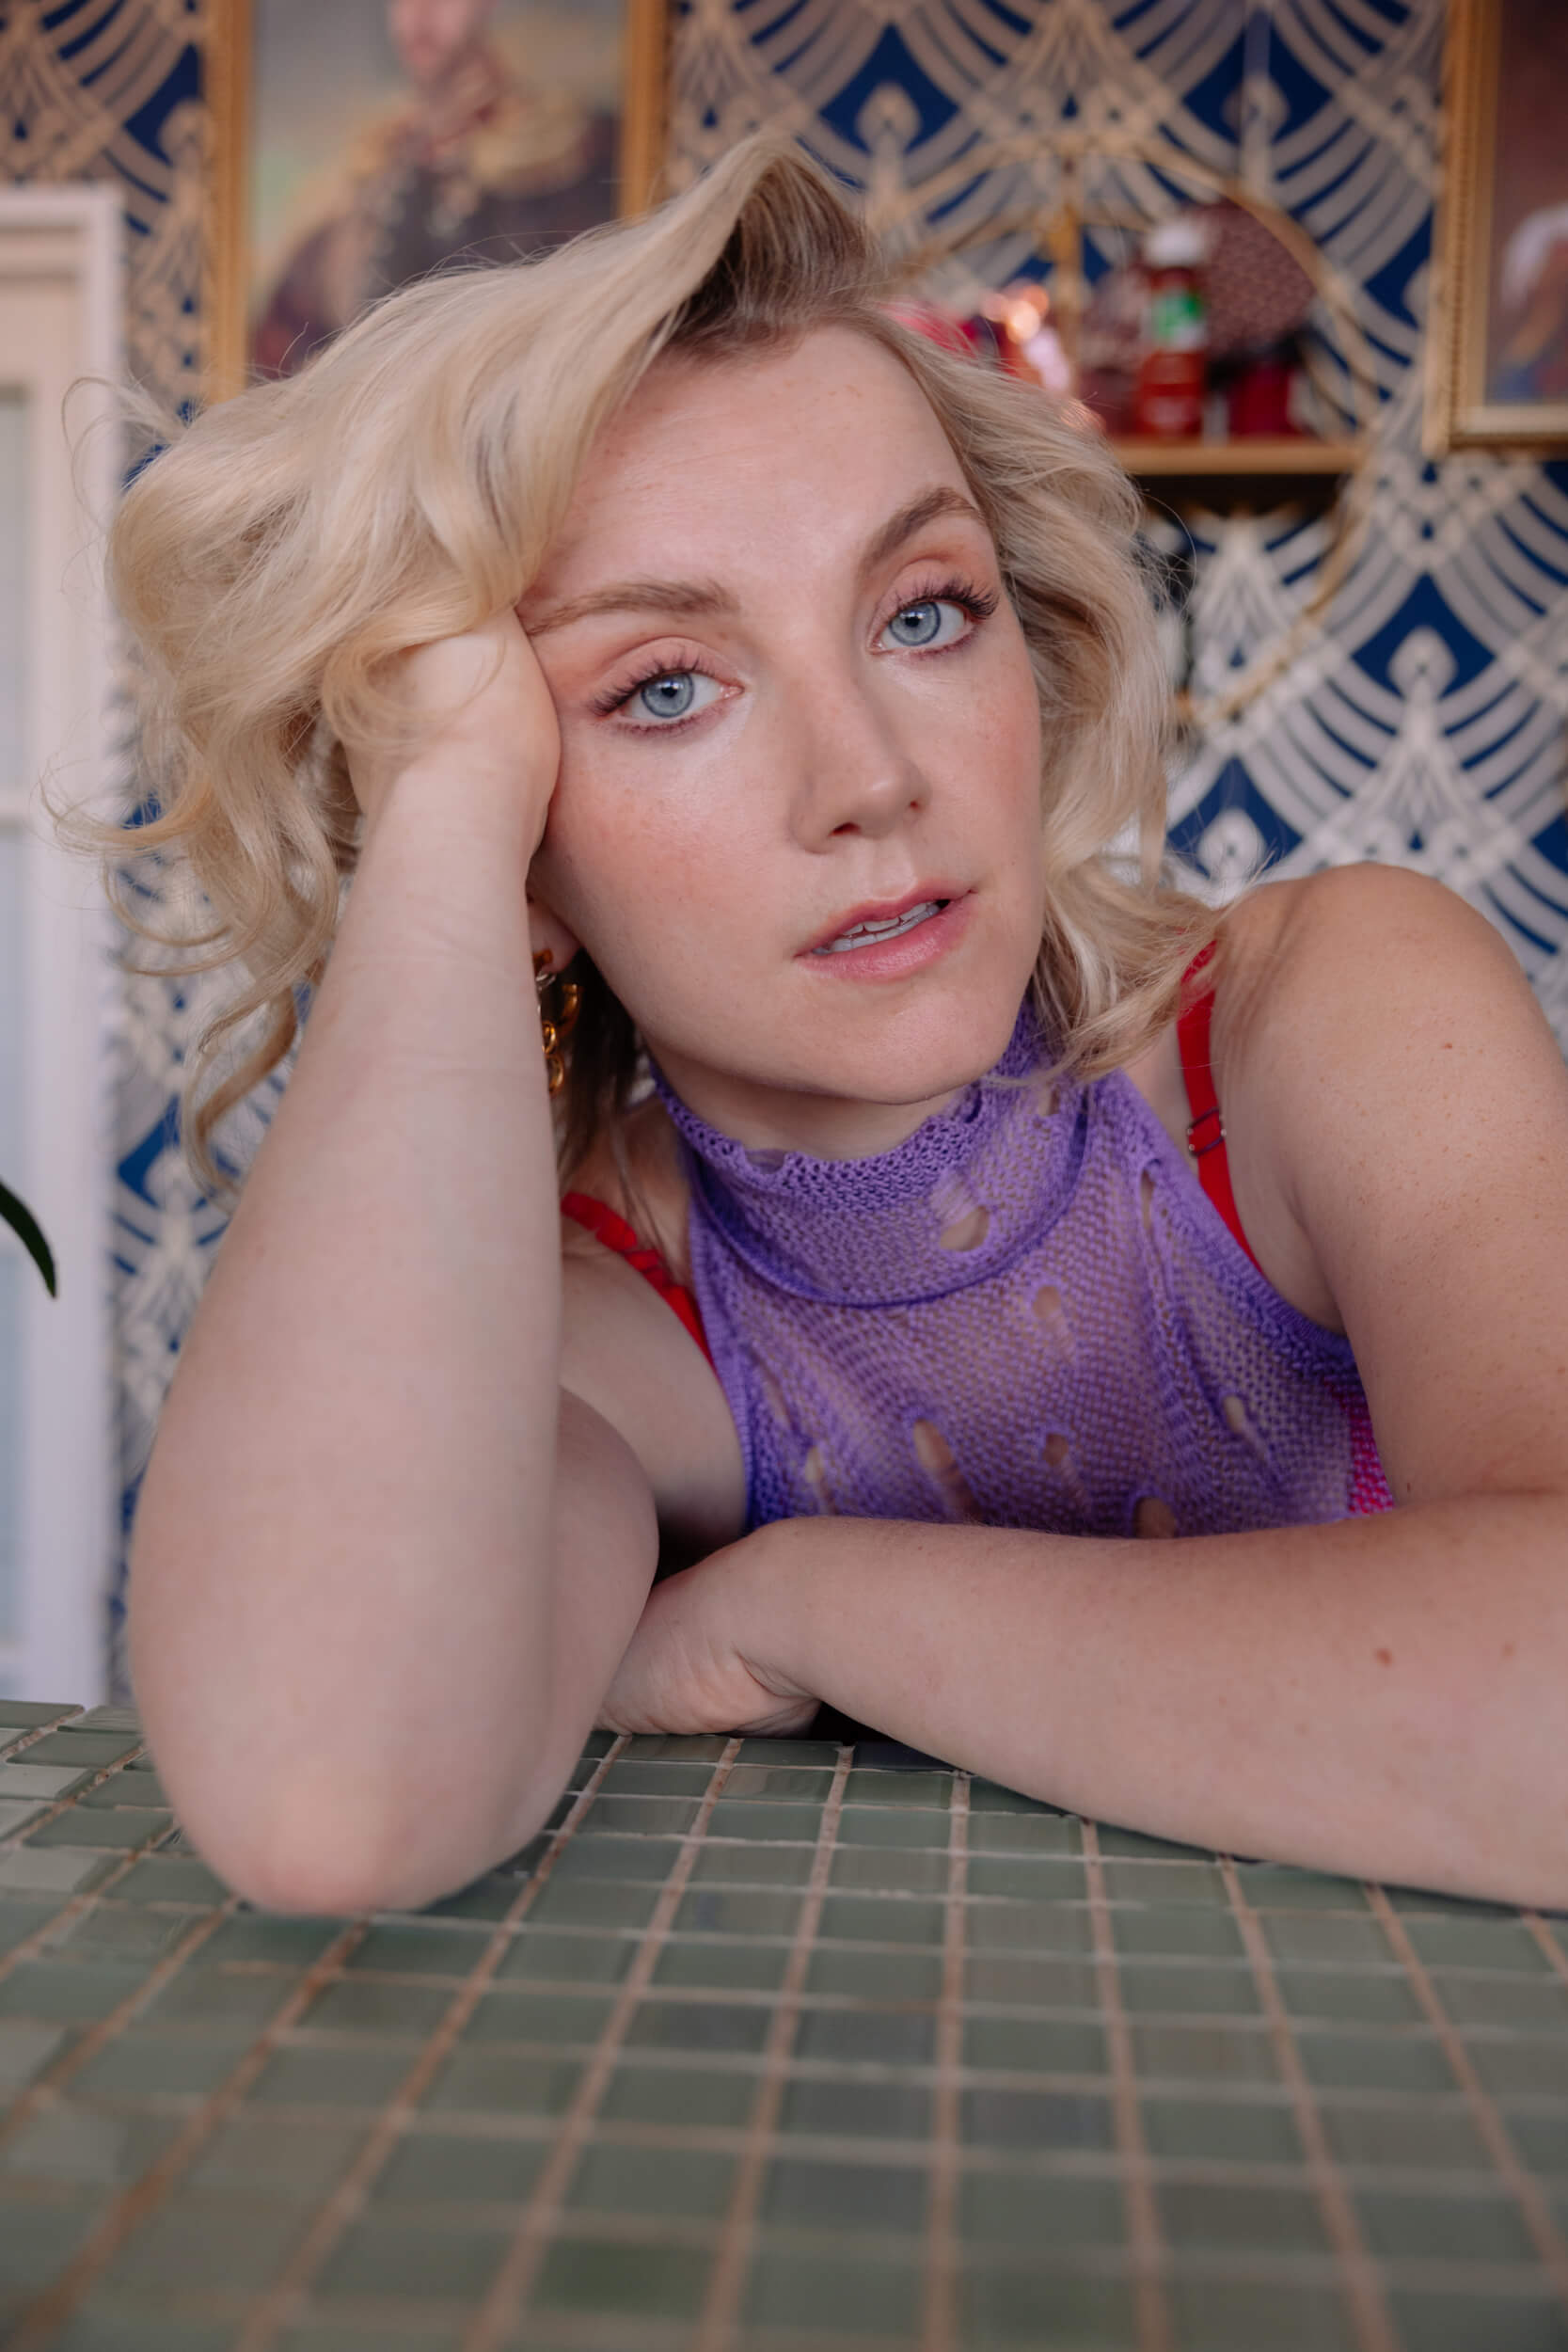 billy gass recommends evanna patricia lynch nude pic